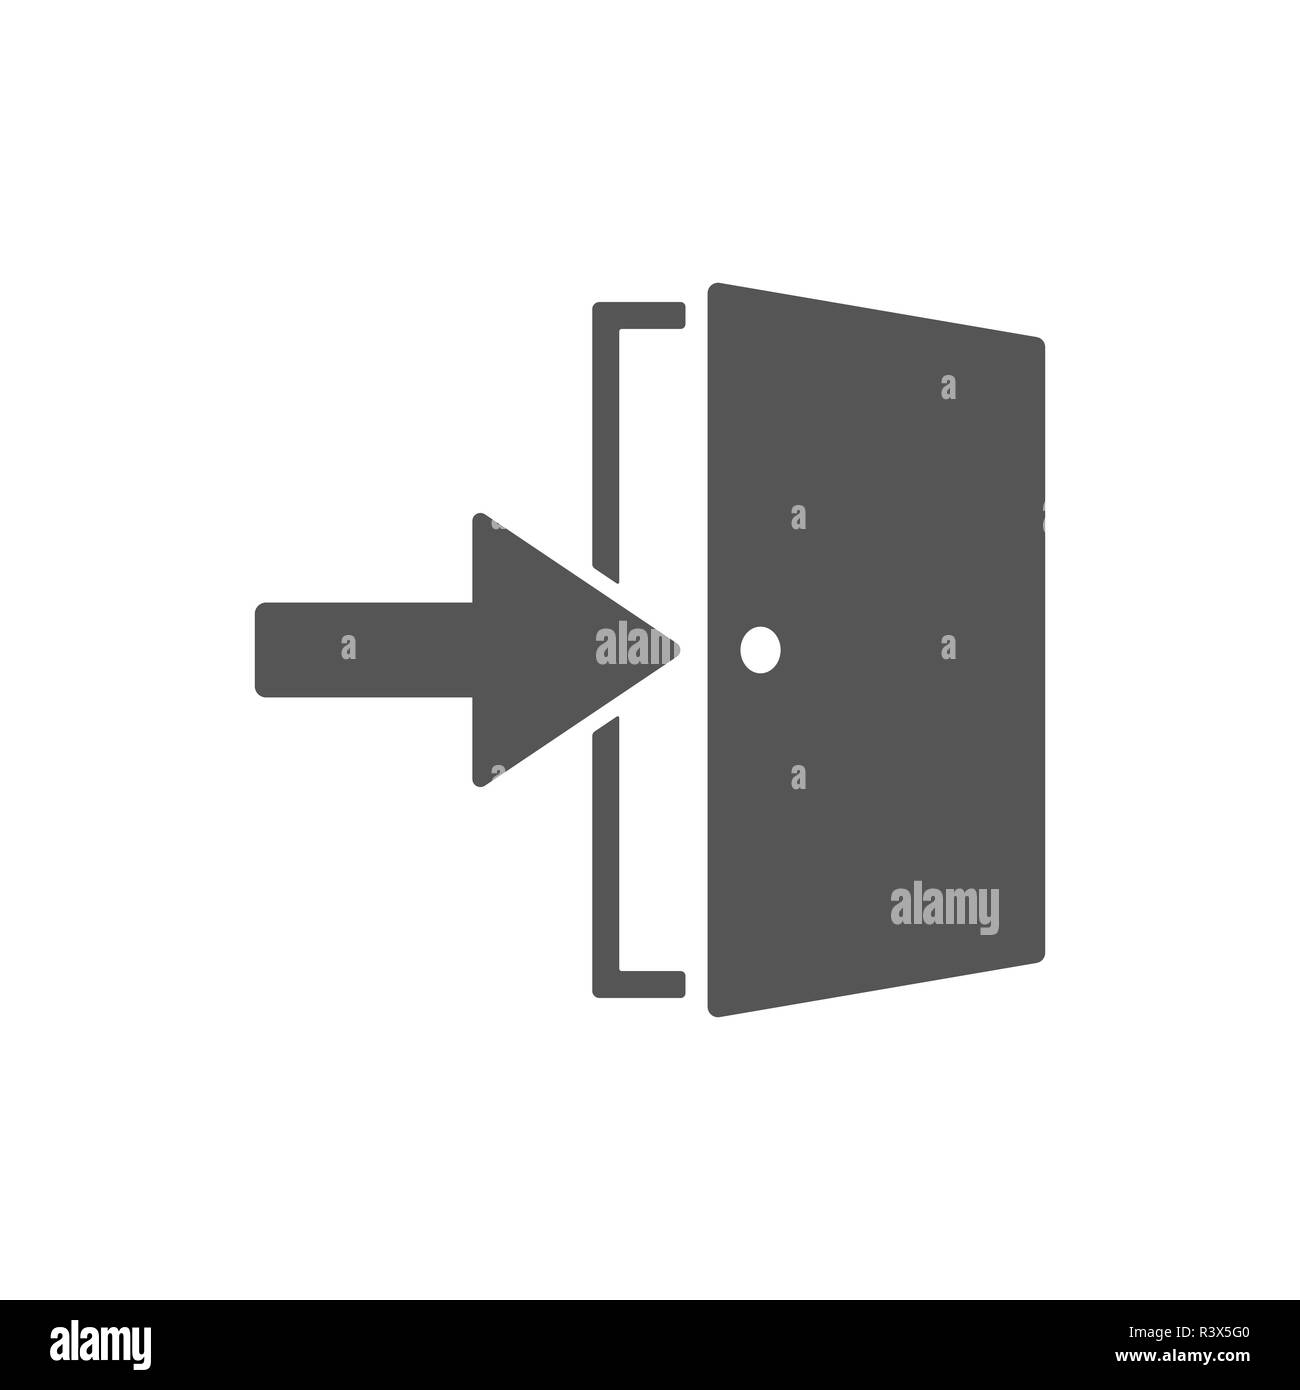 Emergency exit, escape route sign. Vector illustration Stock Vector